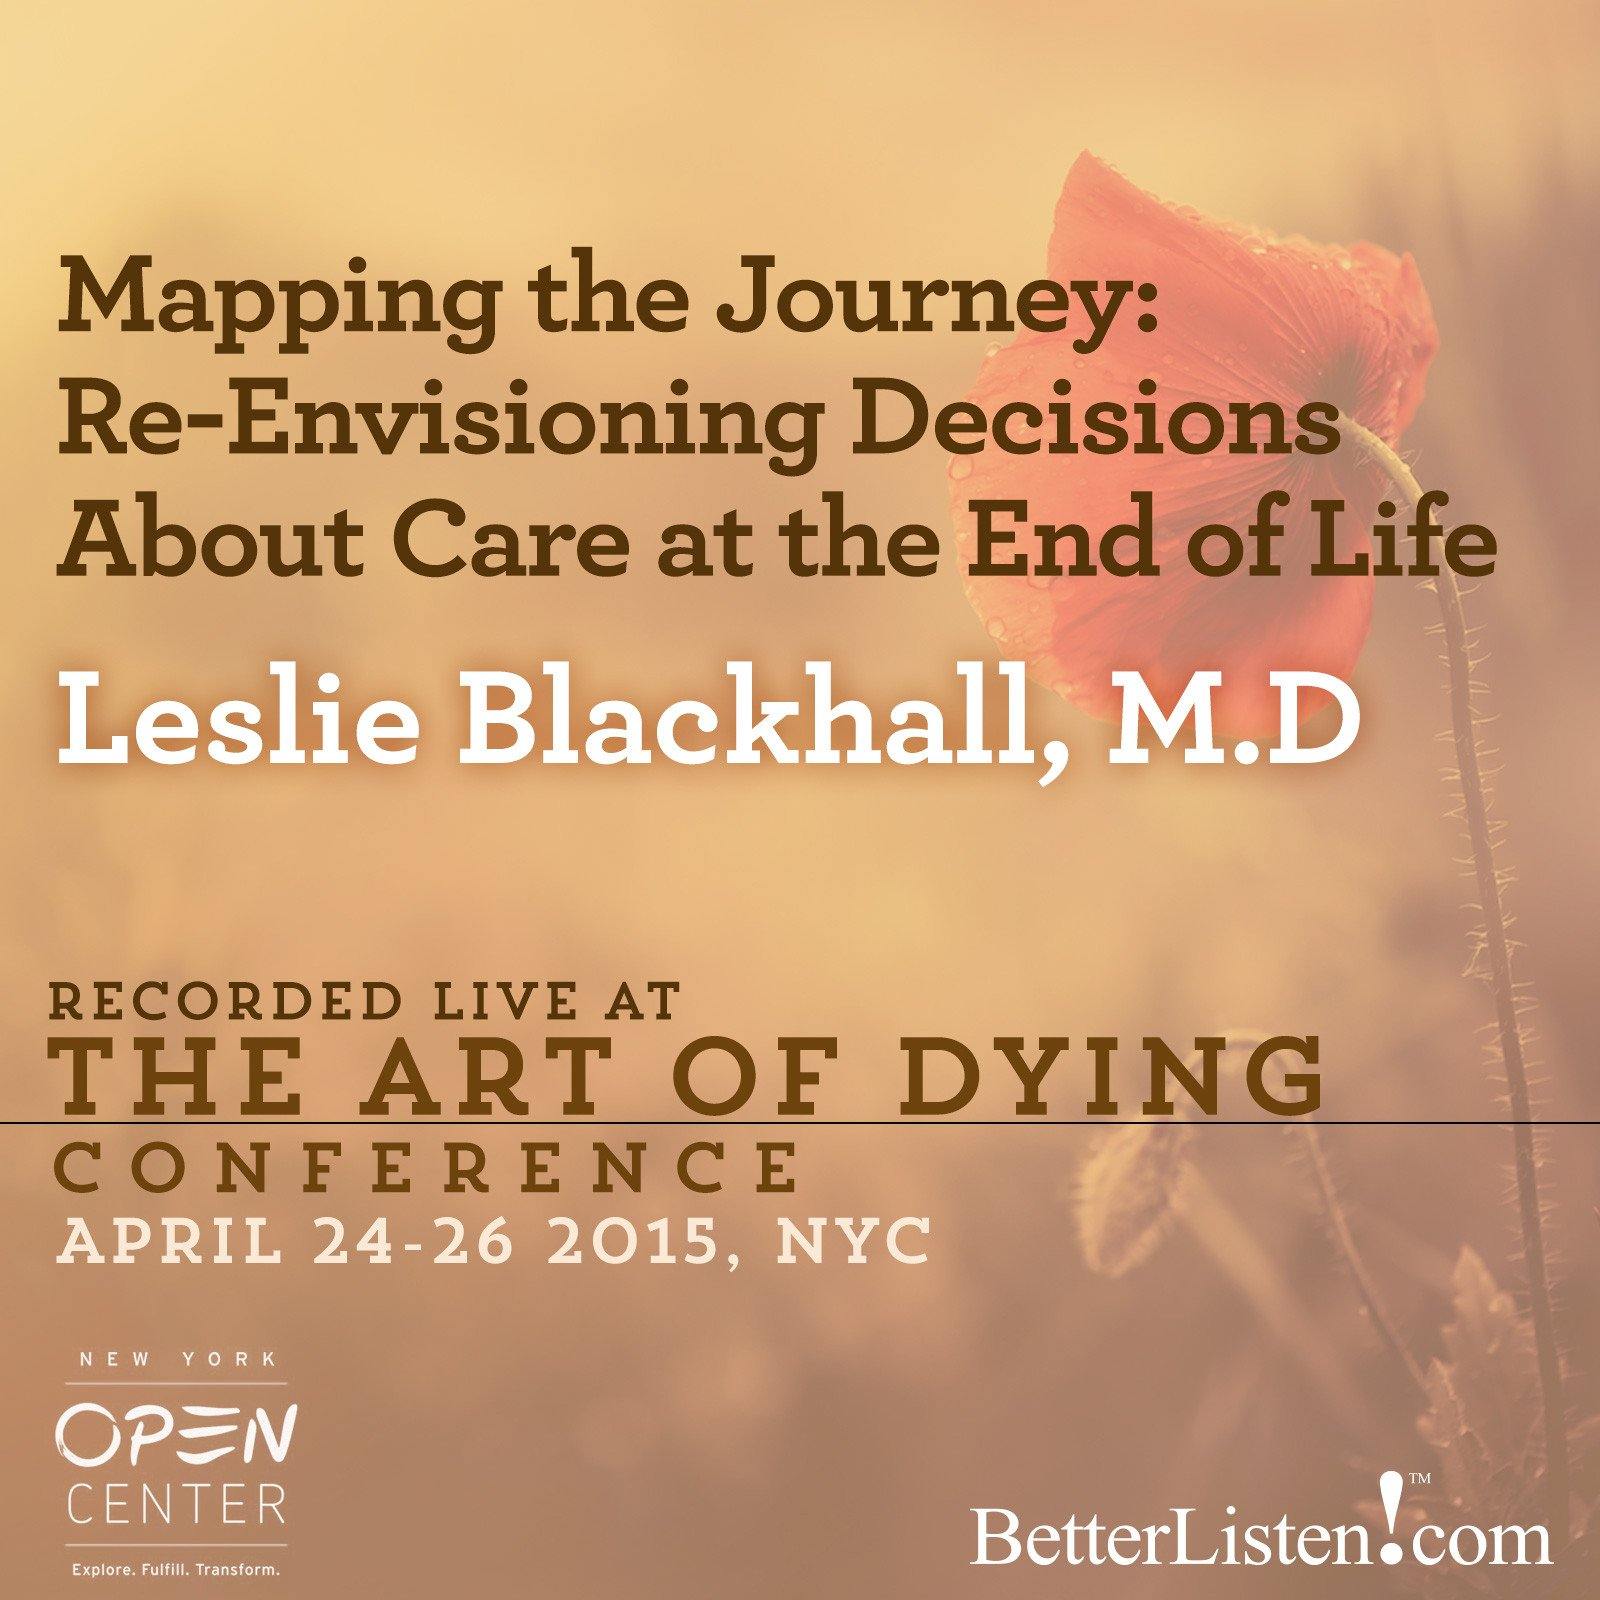 Mapping the Journey: Re-Envisioning Decisions About Care at the End of Life with Leslie Blackhall Audio Program BetterListen! - BetterListen!